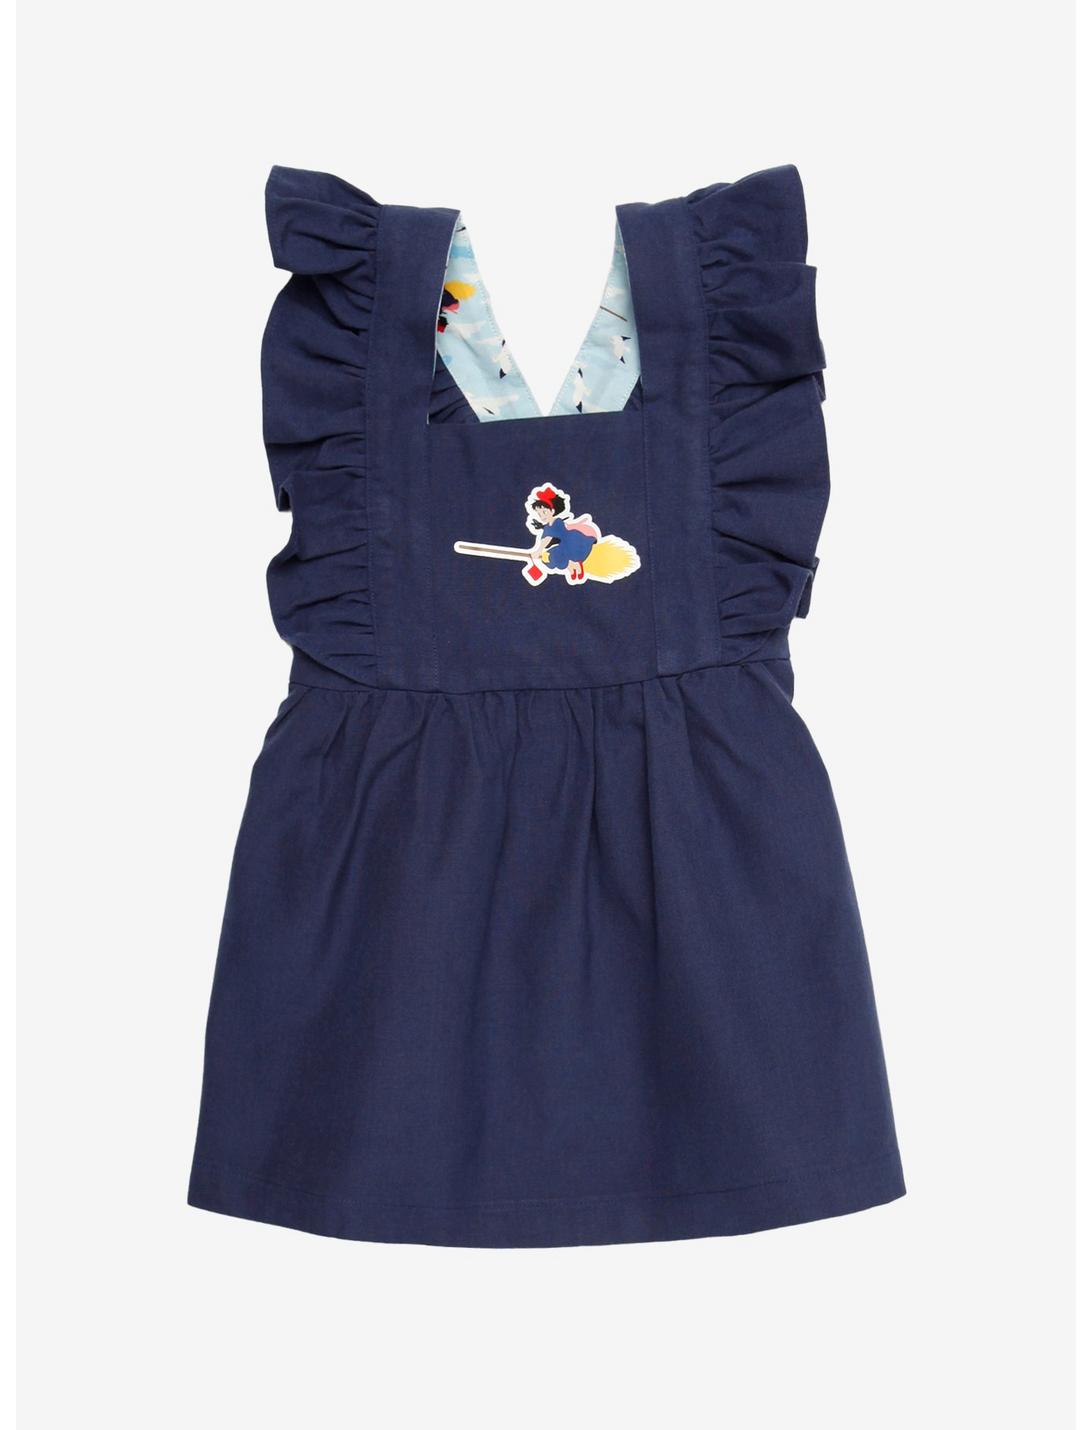 Our Universe Studio Ghibli Kiki's Delivery Service Ruffle Toddler Dress - BoxLunch Exclusive, YELLOW, hi-res